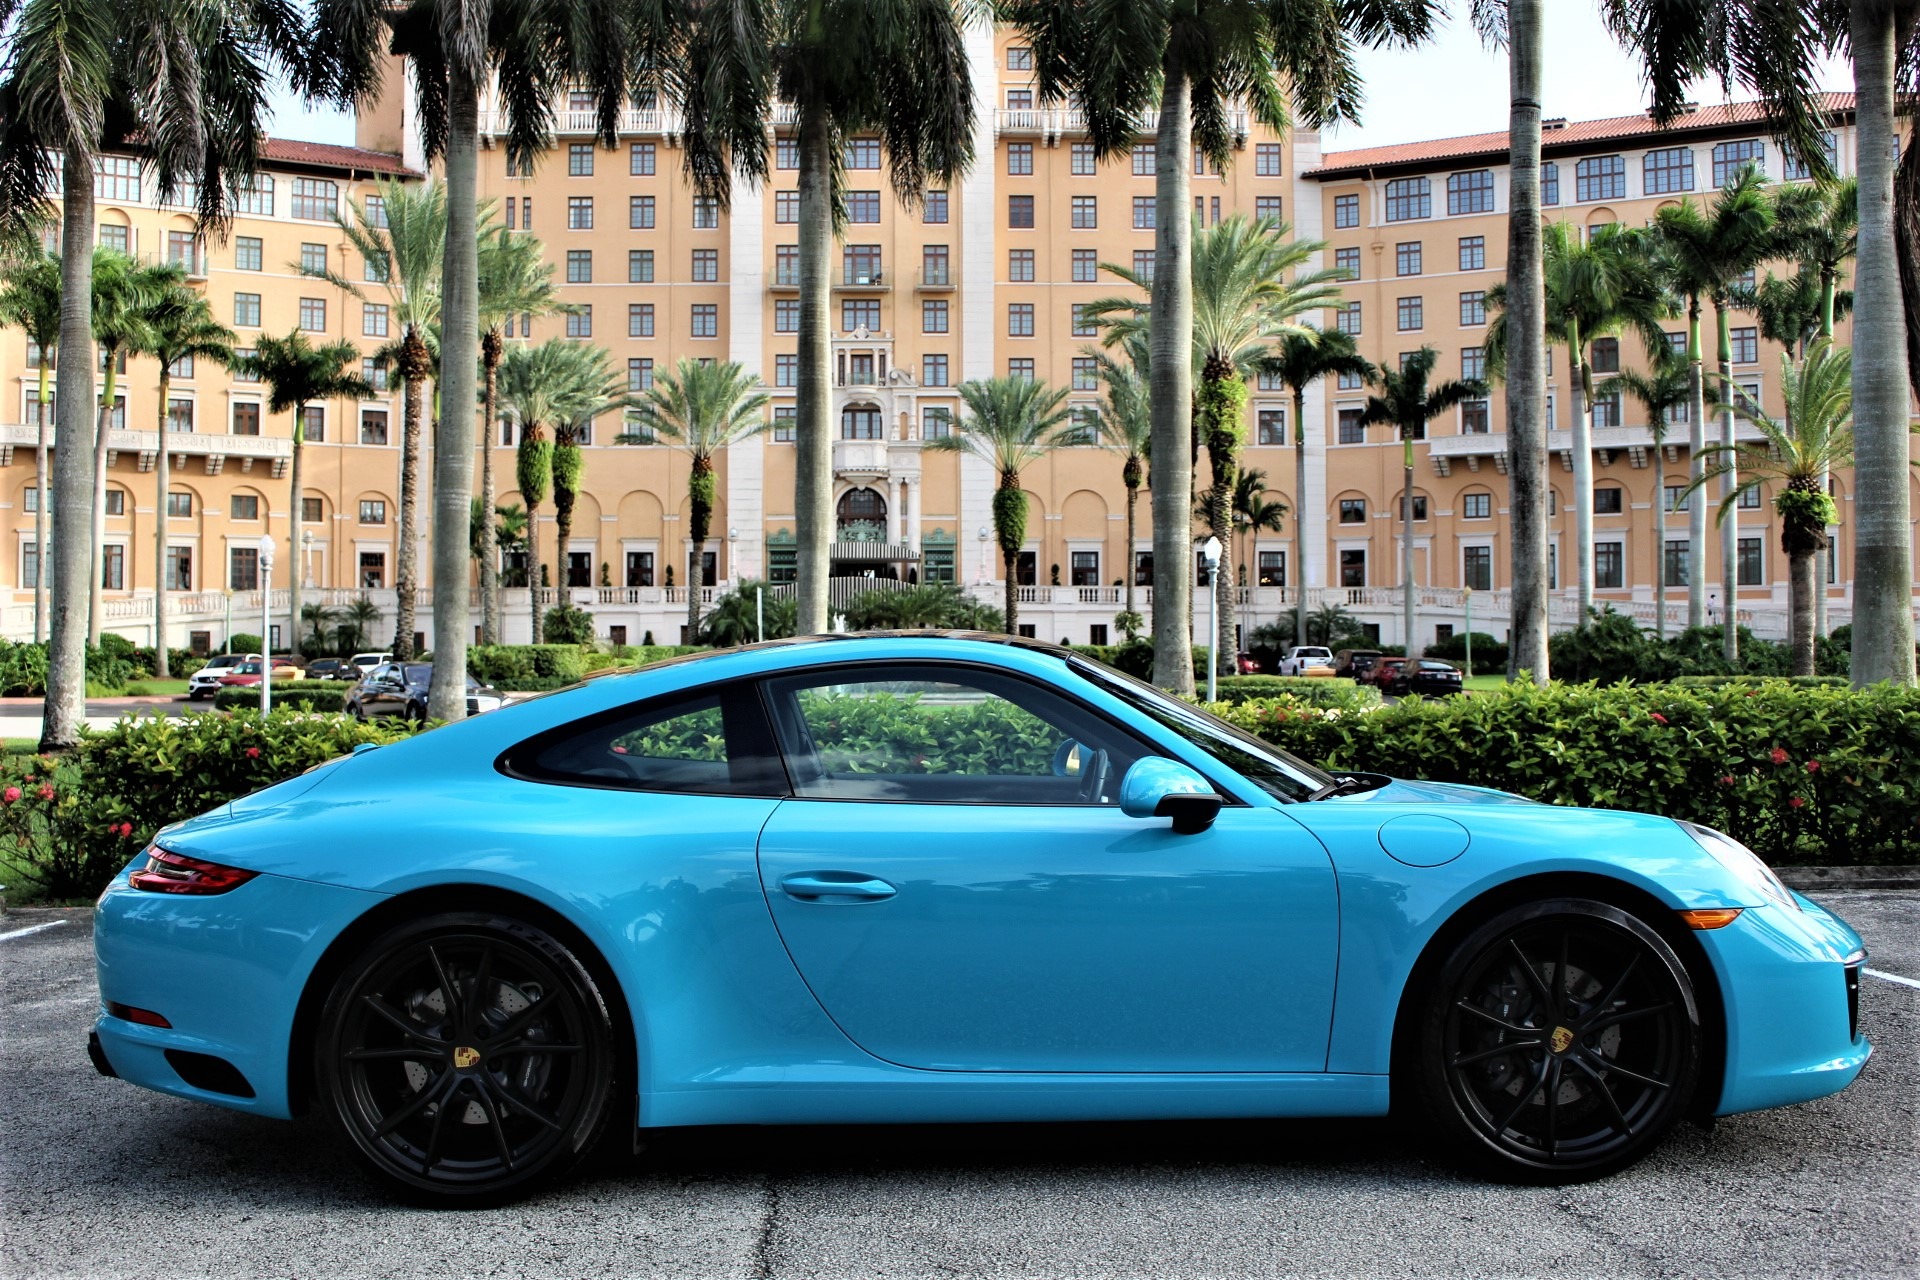 Used 2017 Porsche 911 Carrera for sale Sold at The Gables Sports Cars in Miami FL 33146 1